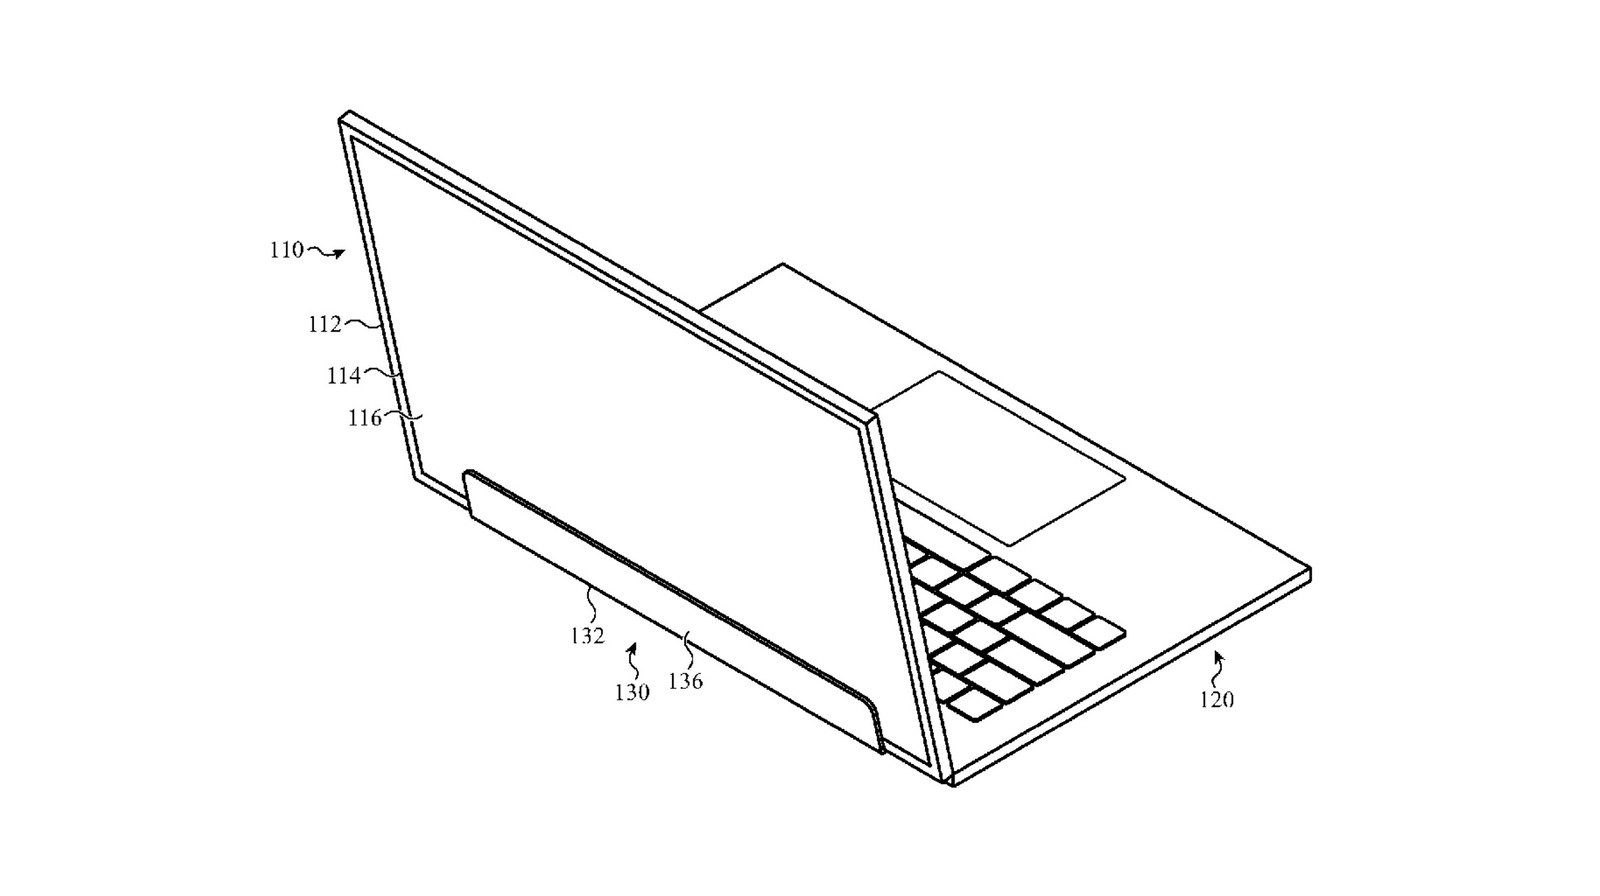 Apple Patents A 2-In-1 MacBook-iPad Hybrid With macOS And Pencil Support